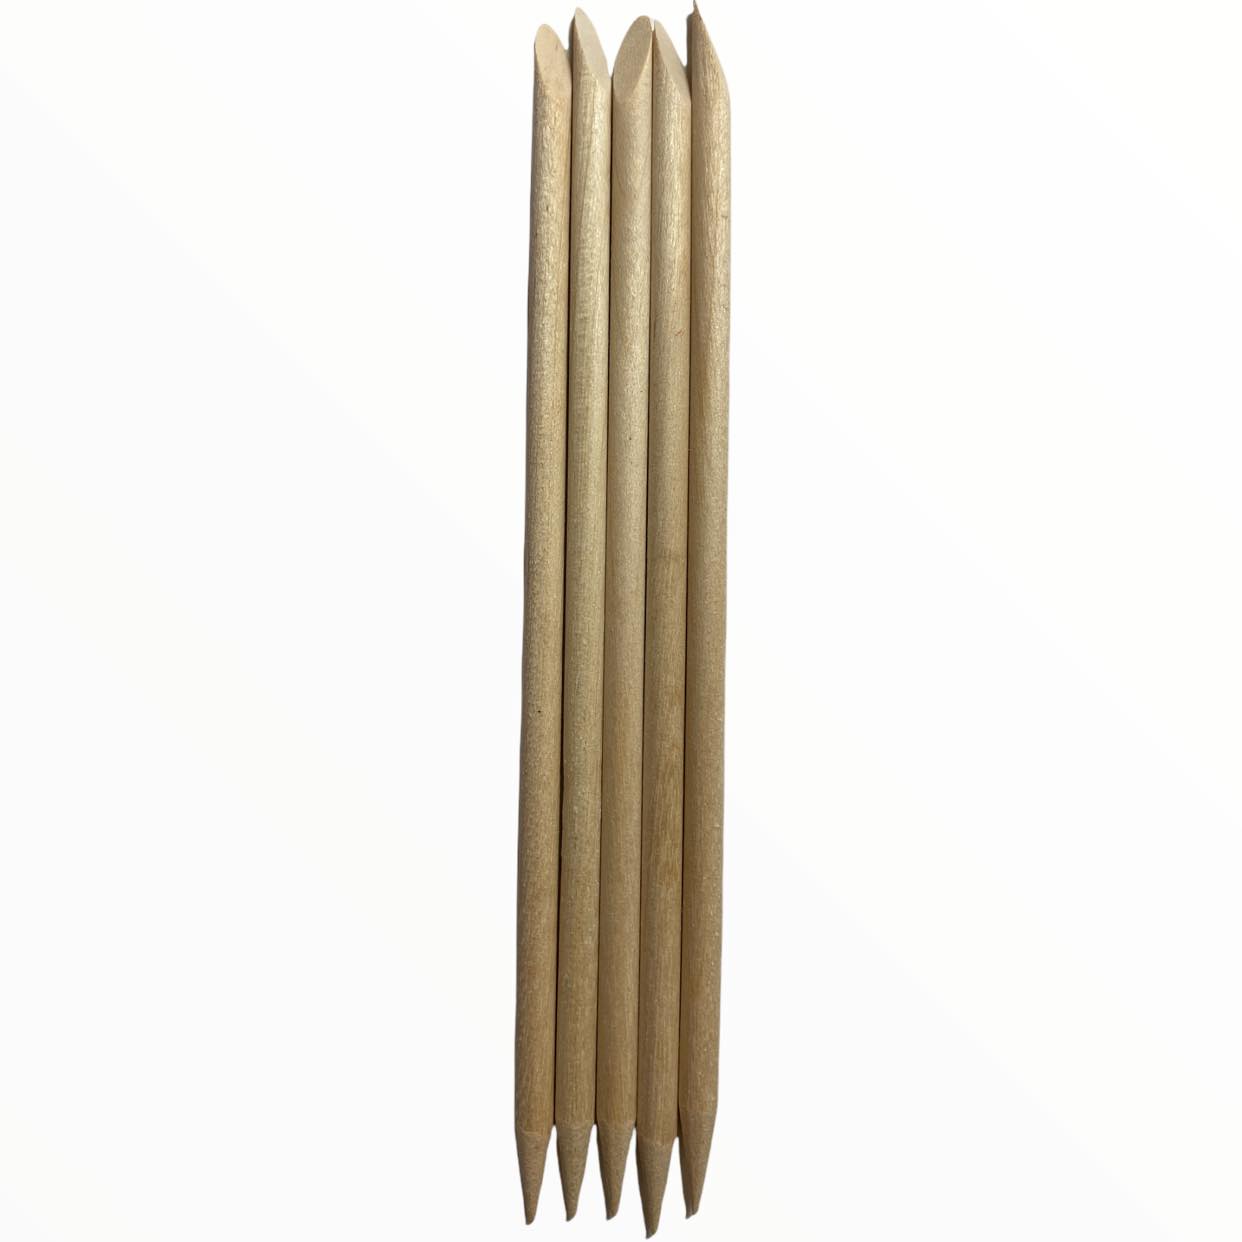 Premium Wood Sticks, Orange Sticks, Cuticle Sticks, Wooden Cuticle Pusher, Disposable Woods Sticks, Cuticle Tools, Manicure and Pedicure Tools for Salon and Home Use.